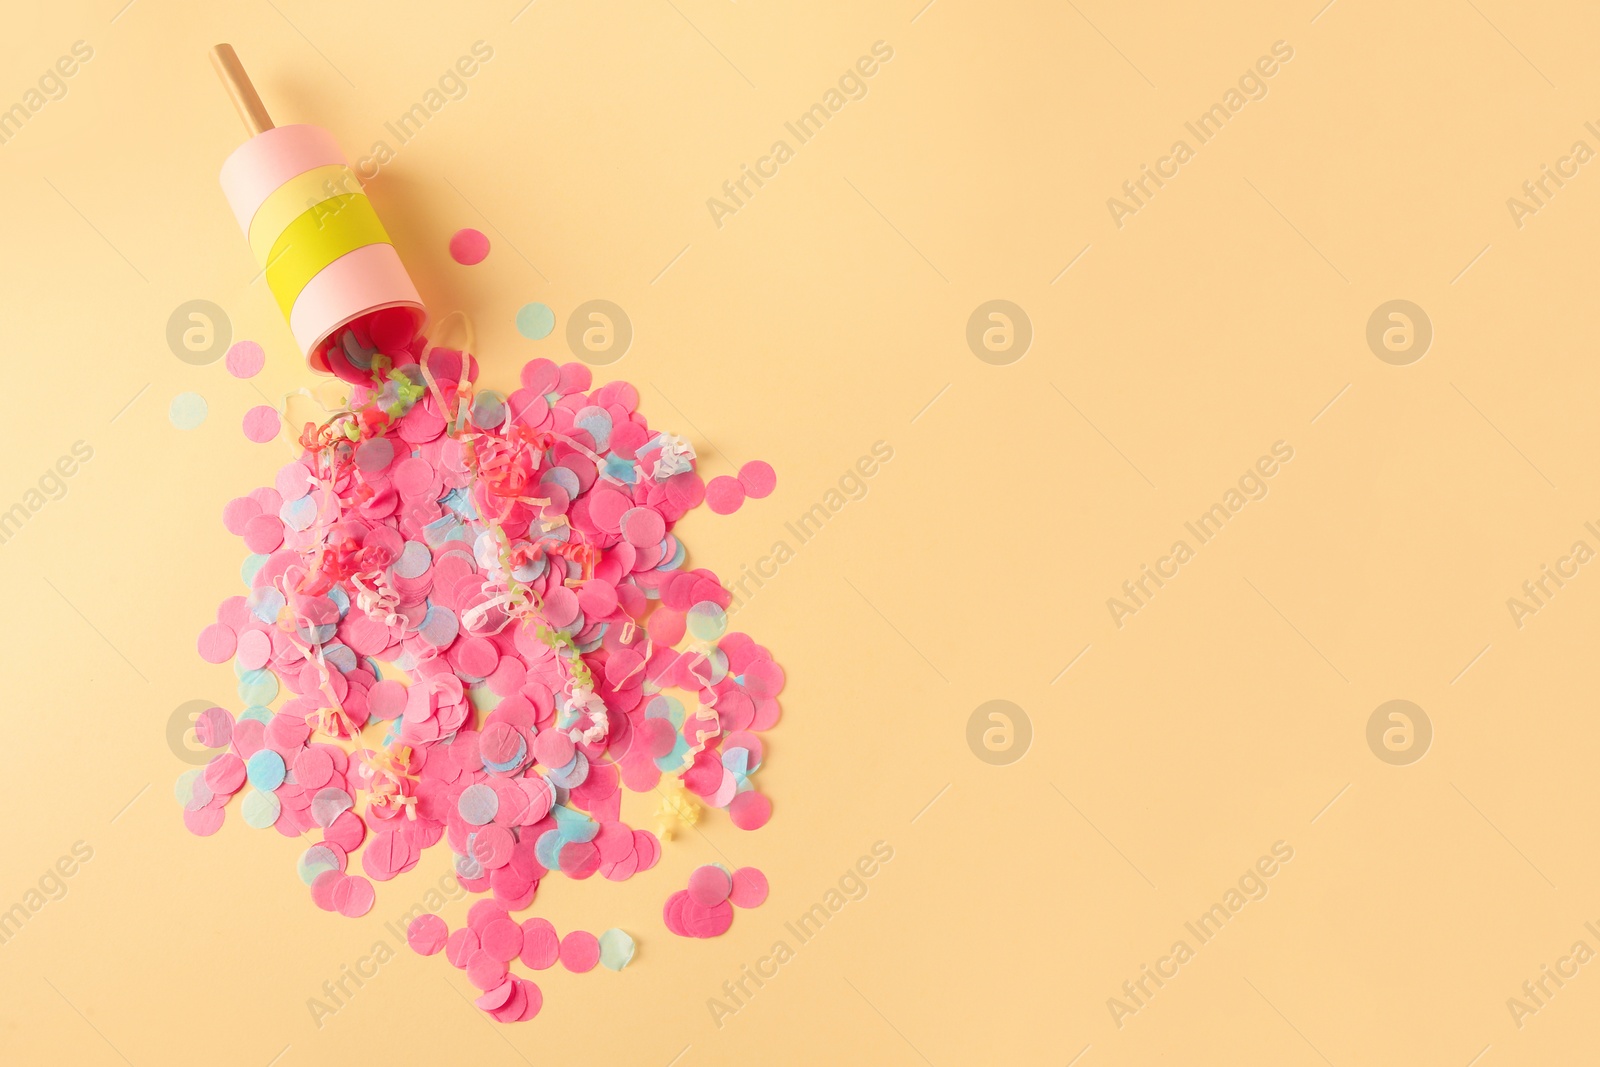 Photo of Colorful confetti and serpentine bursting out of party popper on beige background, flat lay. Space for text